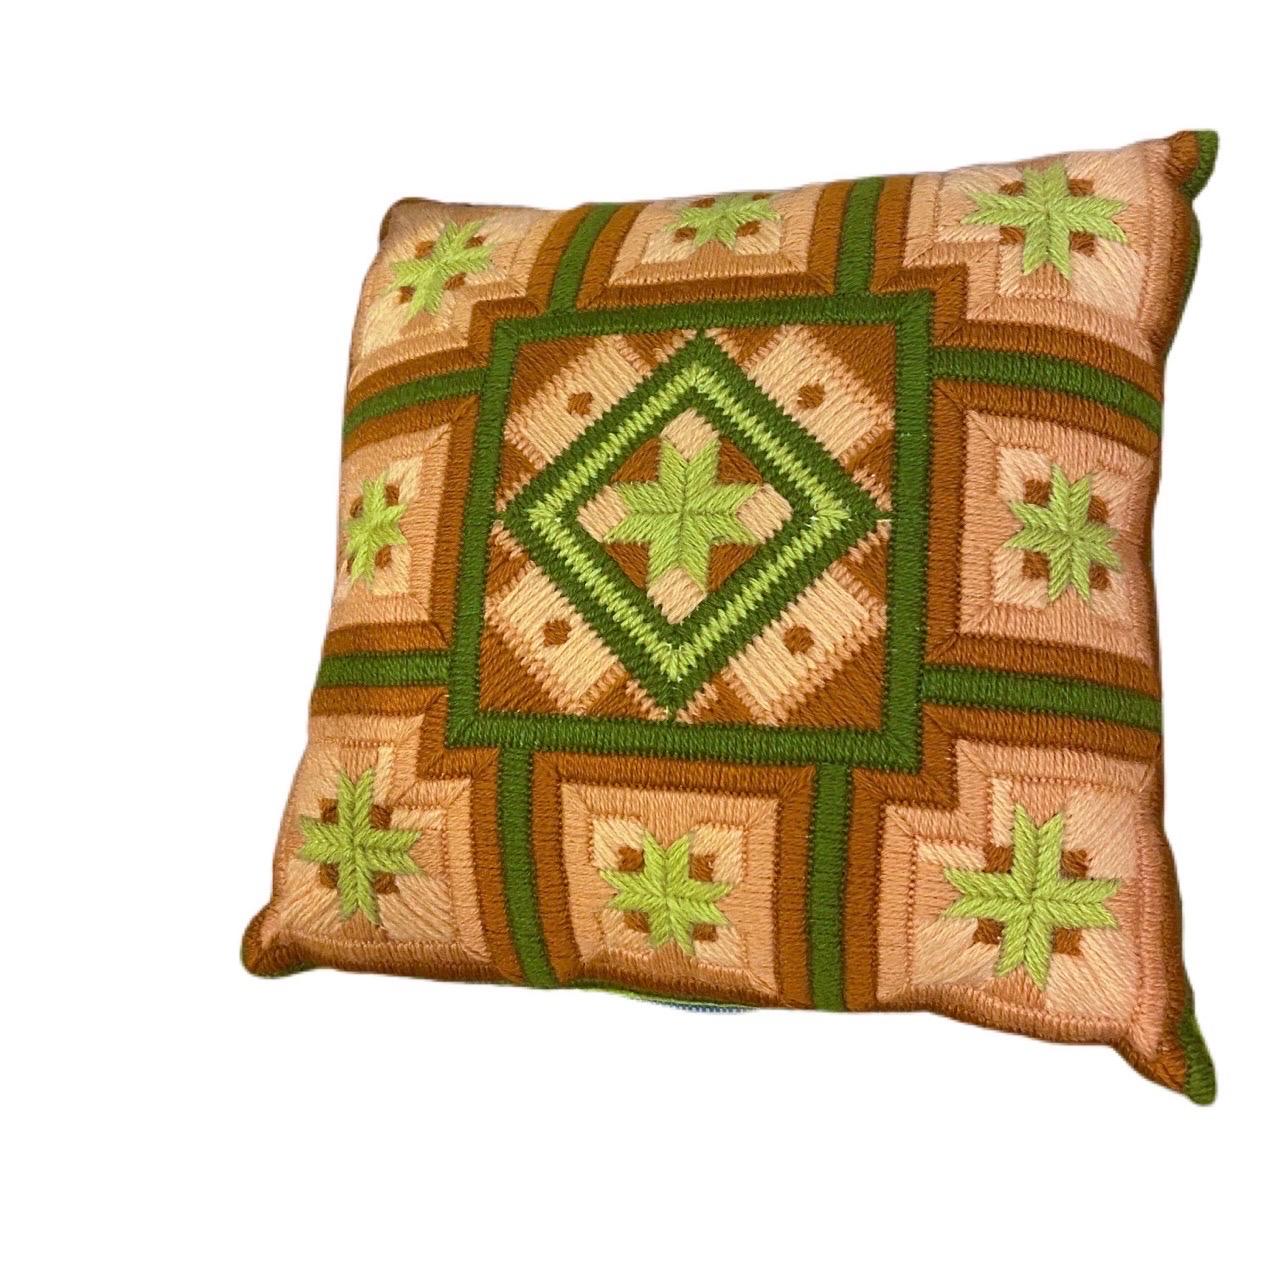 Vintage Stitching Pink, Green, and Umber Geometric Pillow For Sale 3